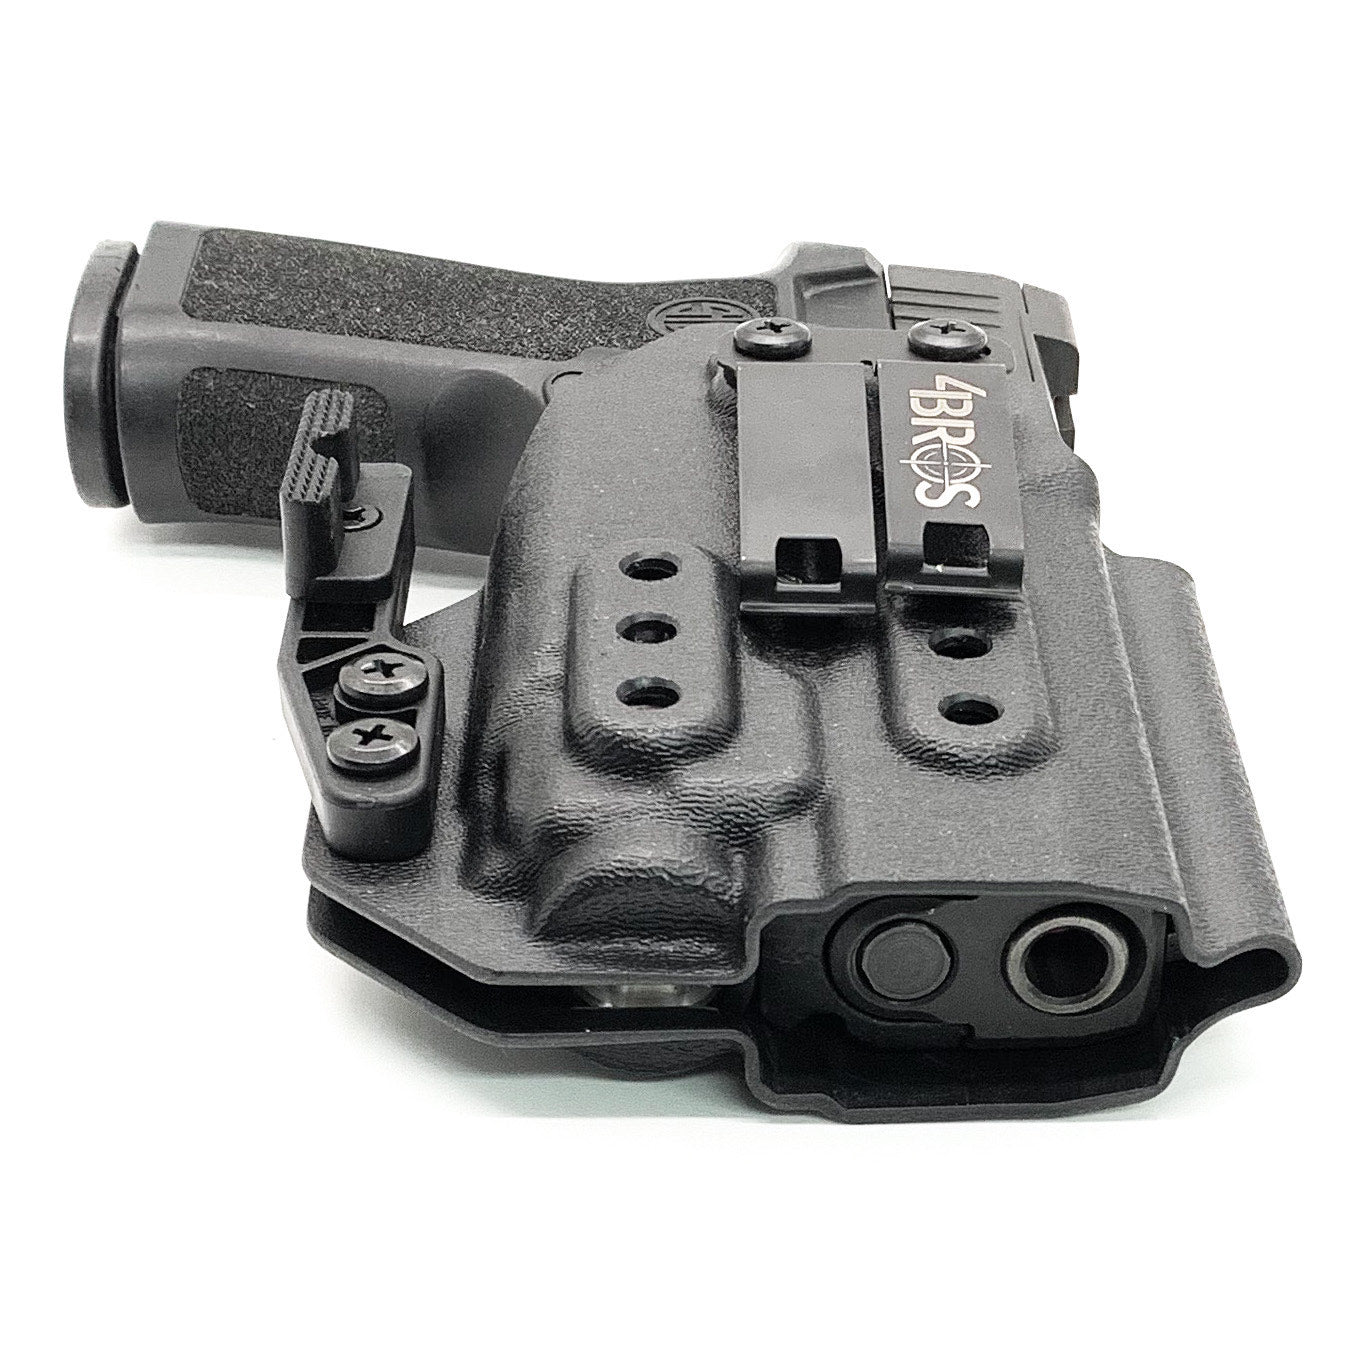 For the best inside waistband holster designed to fit the Sig Sauer P320 Compact, Carry and M18 pistols with Streamlight TLR-8 or TLR-8A weapon mounted light shop Four Brothers Holsters. Full Sweat guard Adjustable Retention Minimal material and smooth edges to reduce printing. Sig Sauer P320 Carry TLR8